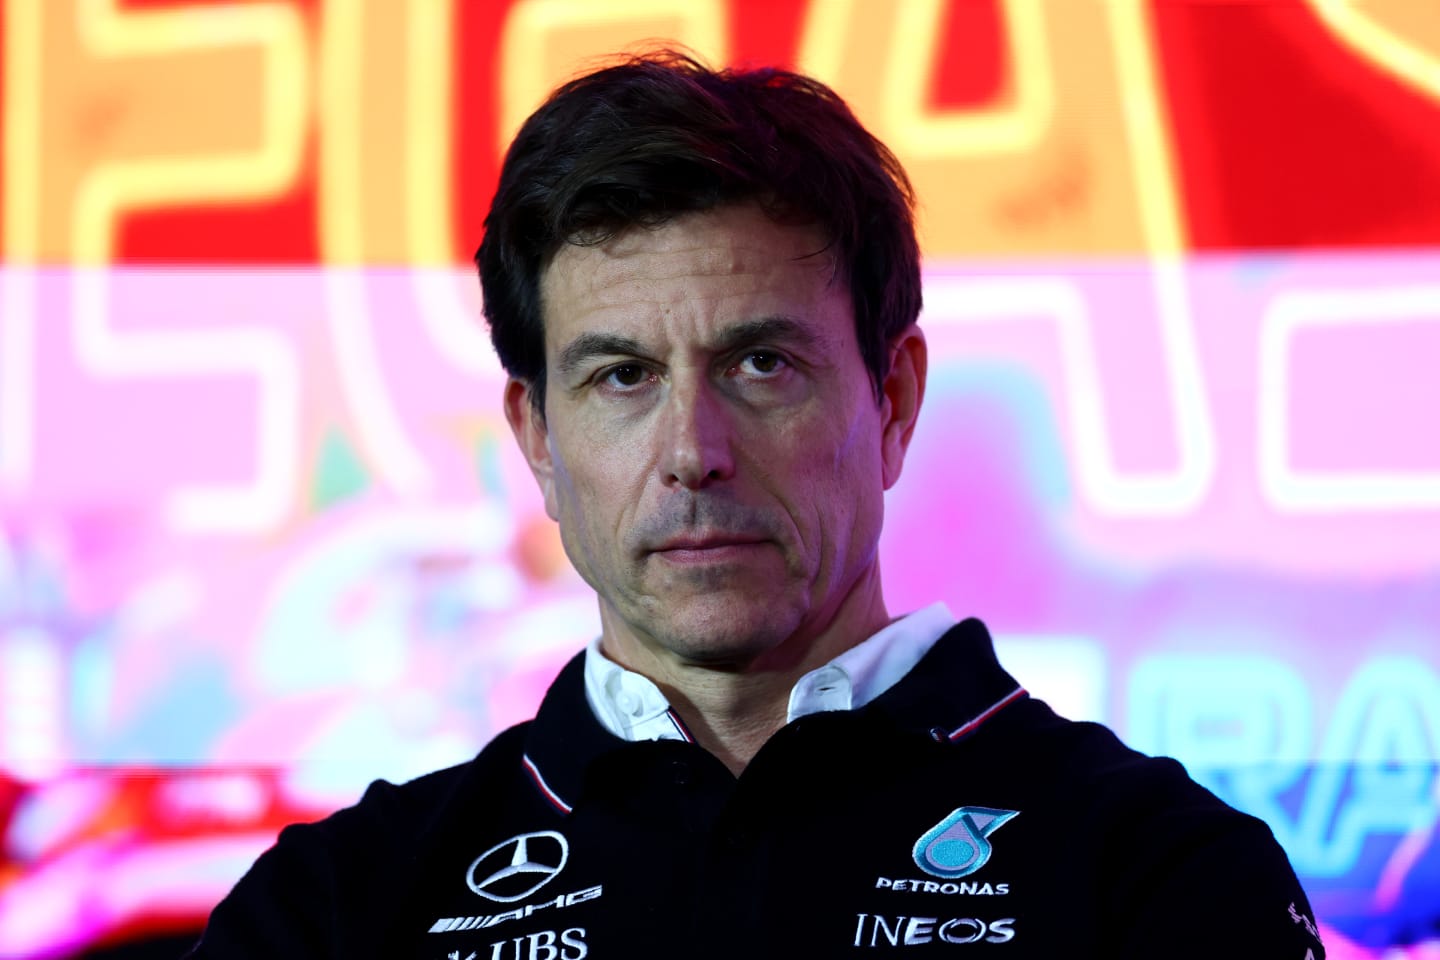 LAS VEGAS, NEVADA - NOVEMBER 16: Mercedes GP Executive Director Toto Wolff looks on in the Team Principals Press Conference during practice ahead of the F1 Grand Prix of Las Vegas at Las Vegas Strip Circuit on November 16, 2023 in Las Vegas, Nevada. (Photo by Dan Istitene/Getty Images)